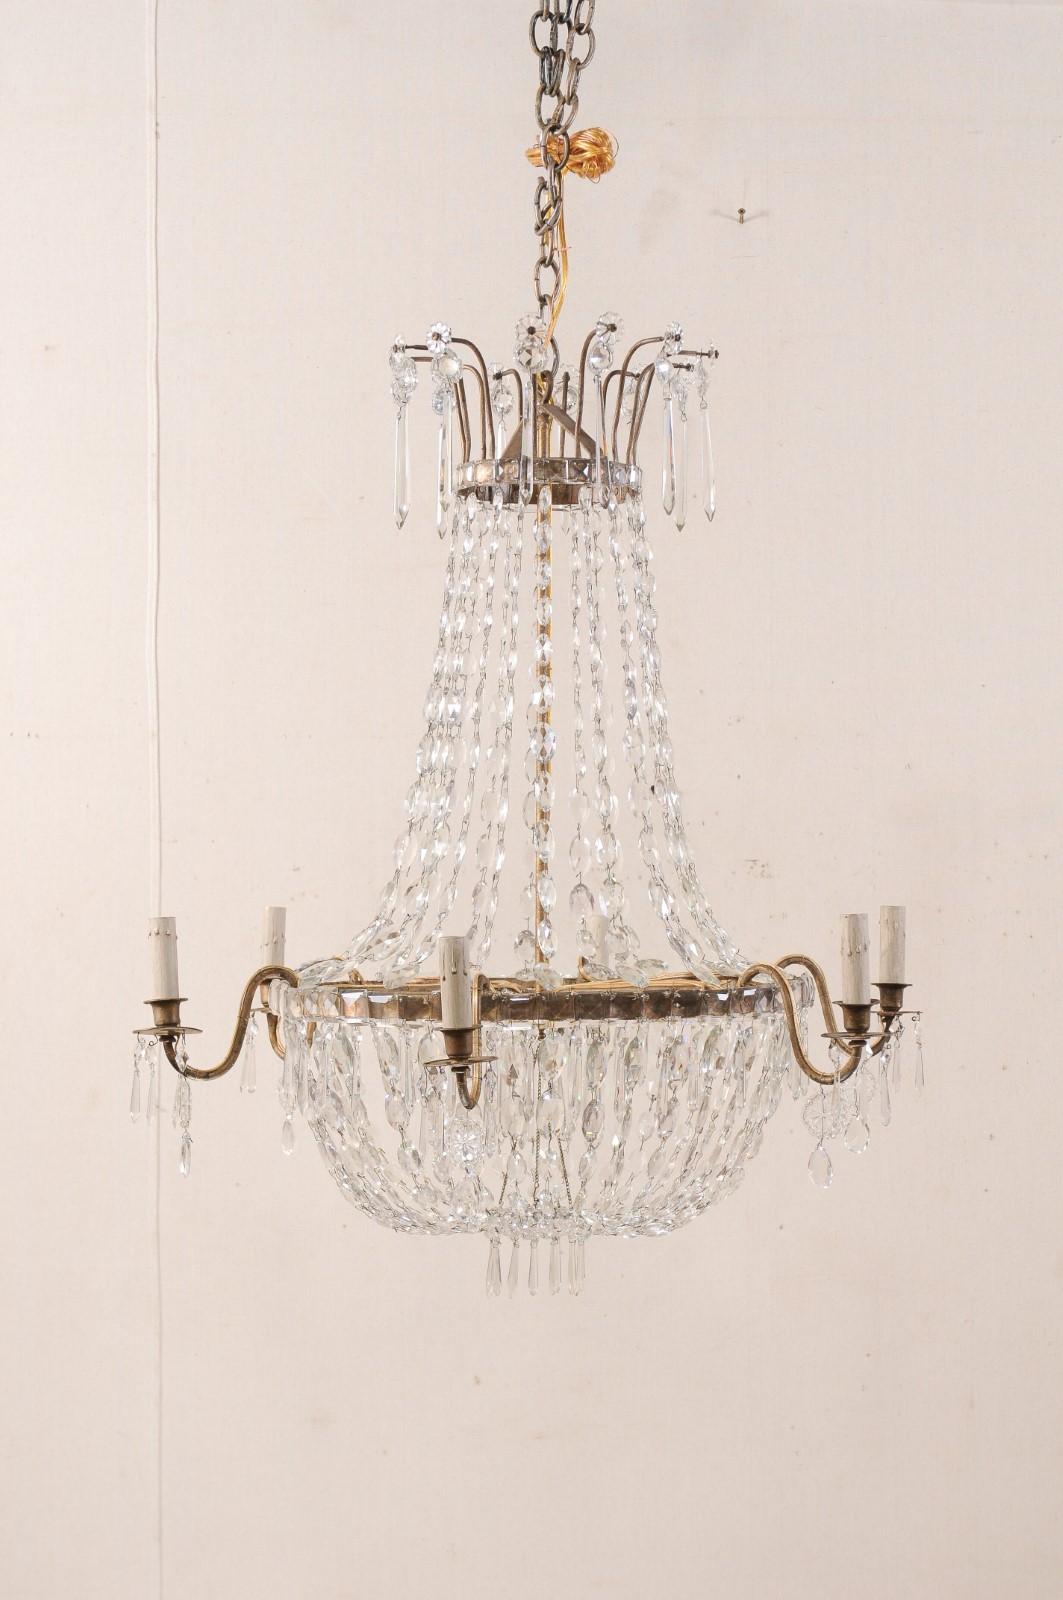 A pair of French Empire-style six-light chandeliers from the early to mid-20th century. These glorious chandeliers from France are each decorated in flowing strands of crystals, which swag down gracefully from the upper canopy, then drape from their